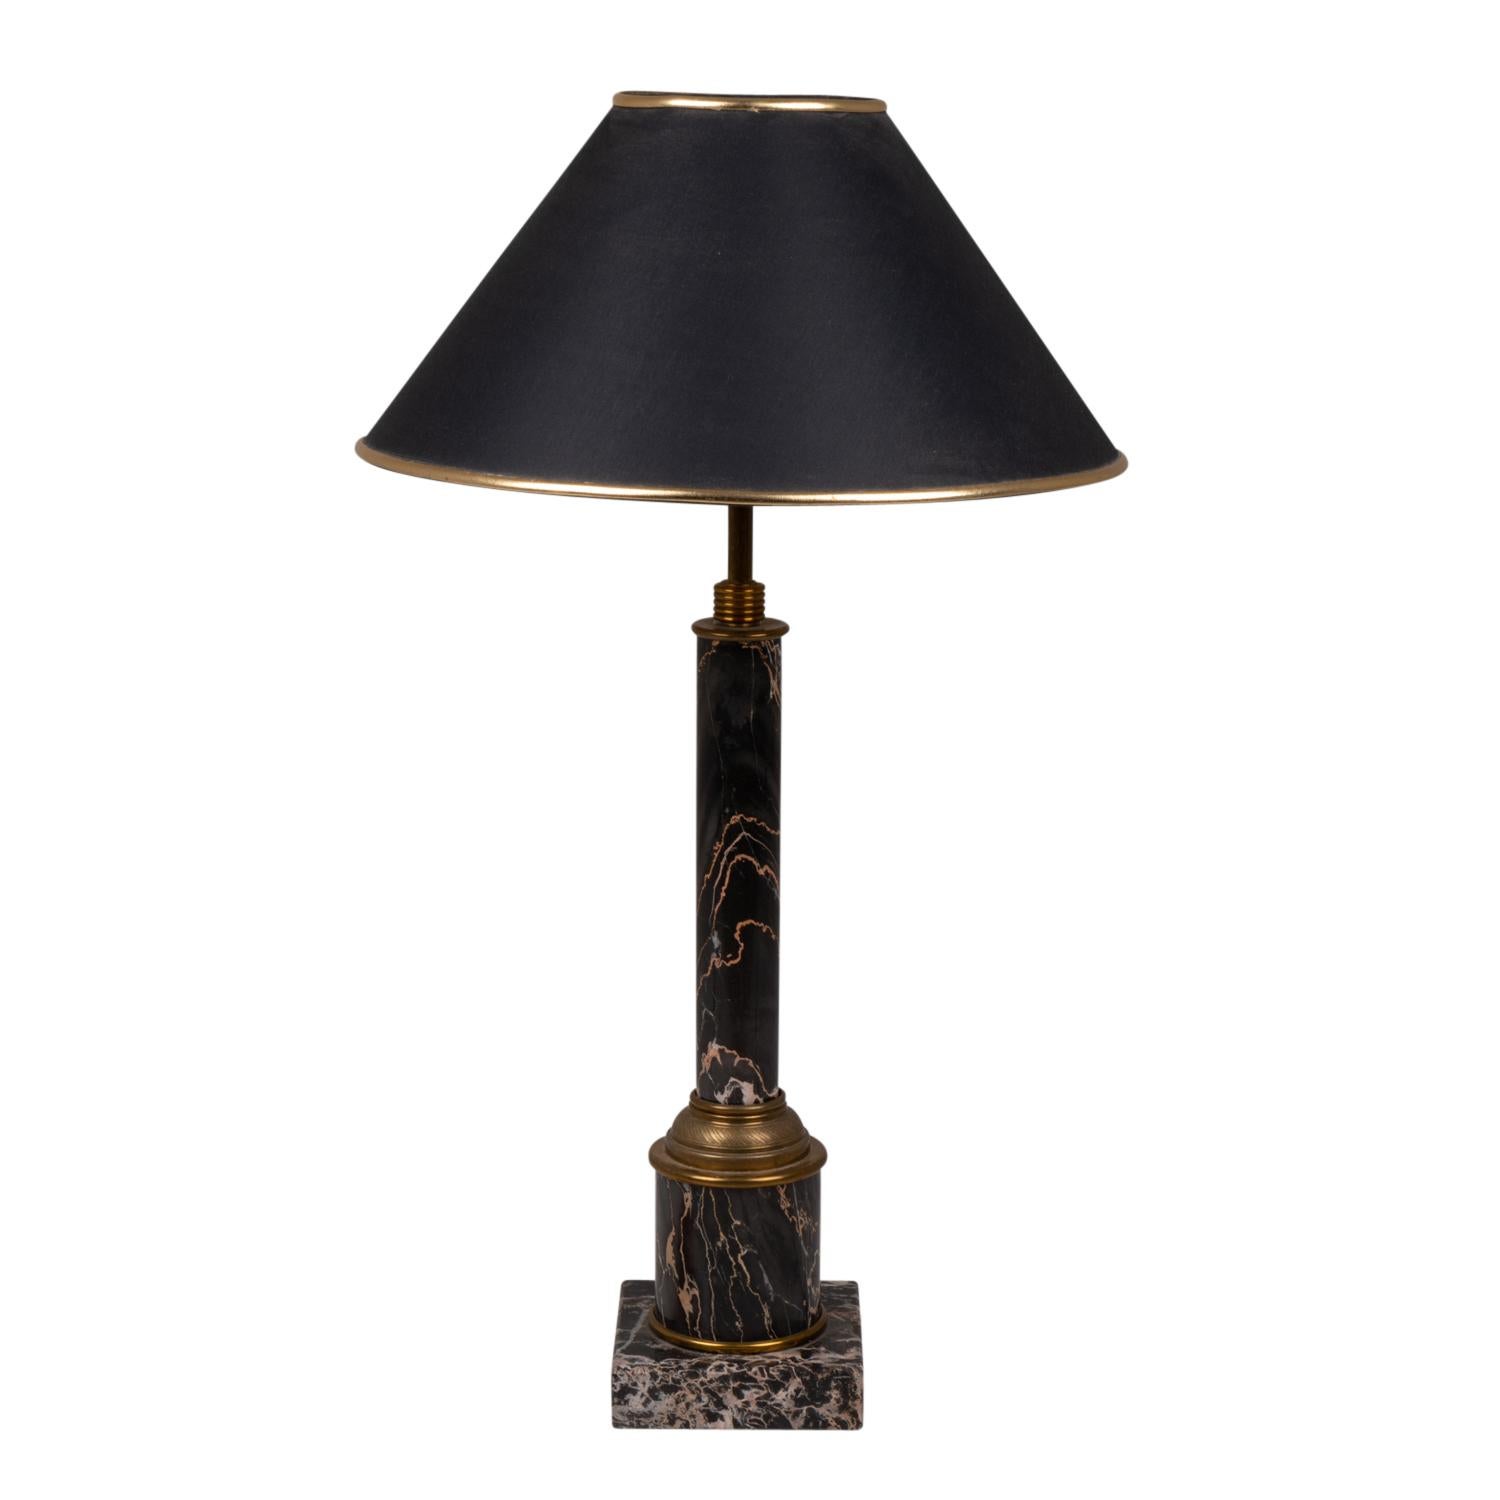 Lamp style Empire in marble and gilded bronze, representing a column in the Antique style, in black portor gold color. Original lampshade in black cotton, with its golden piping.

French work realized circa 1950.

New and functional electrical